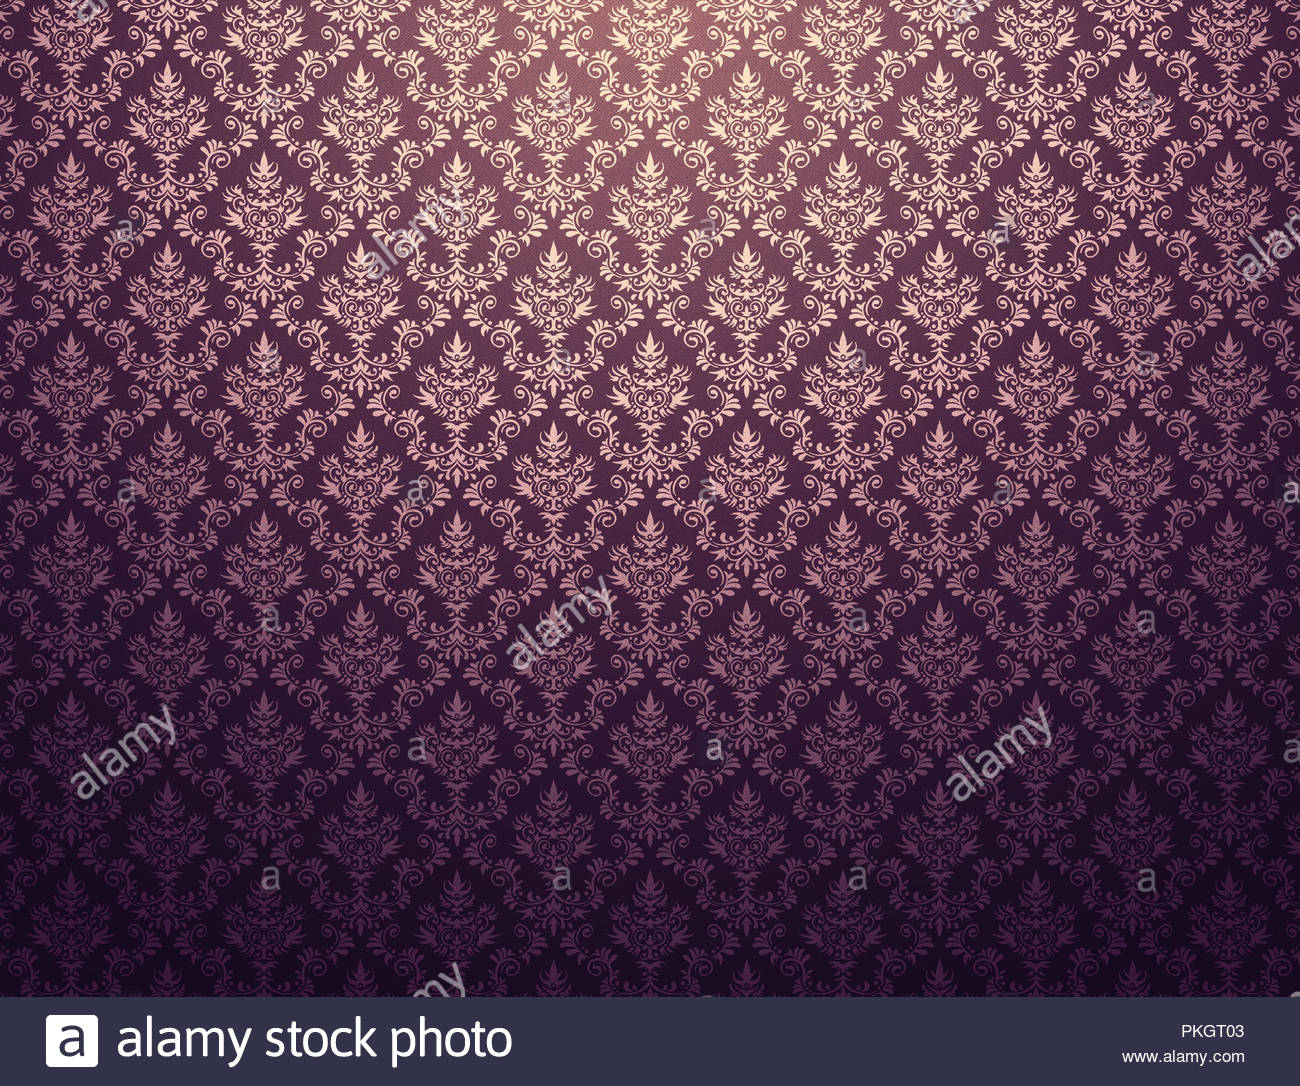 Purple Damask Wallpaper With Gold Floral Patterns Stock Photo